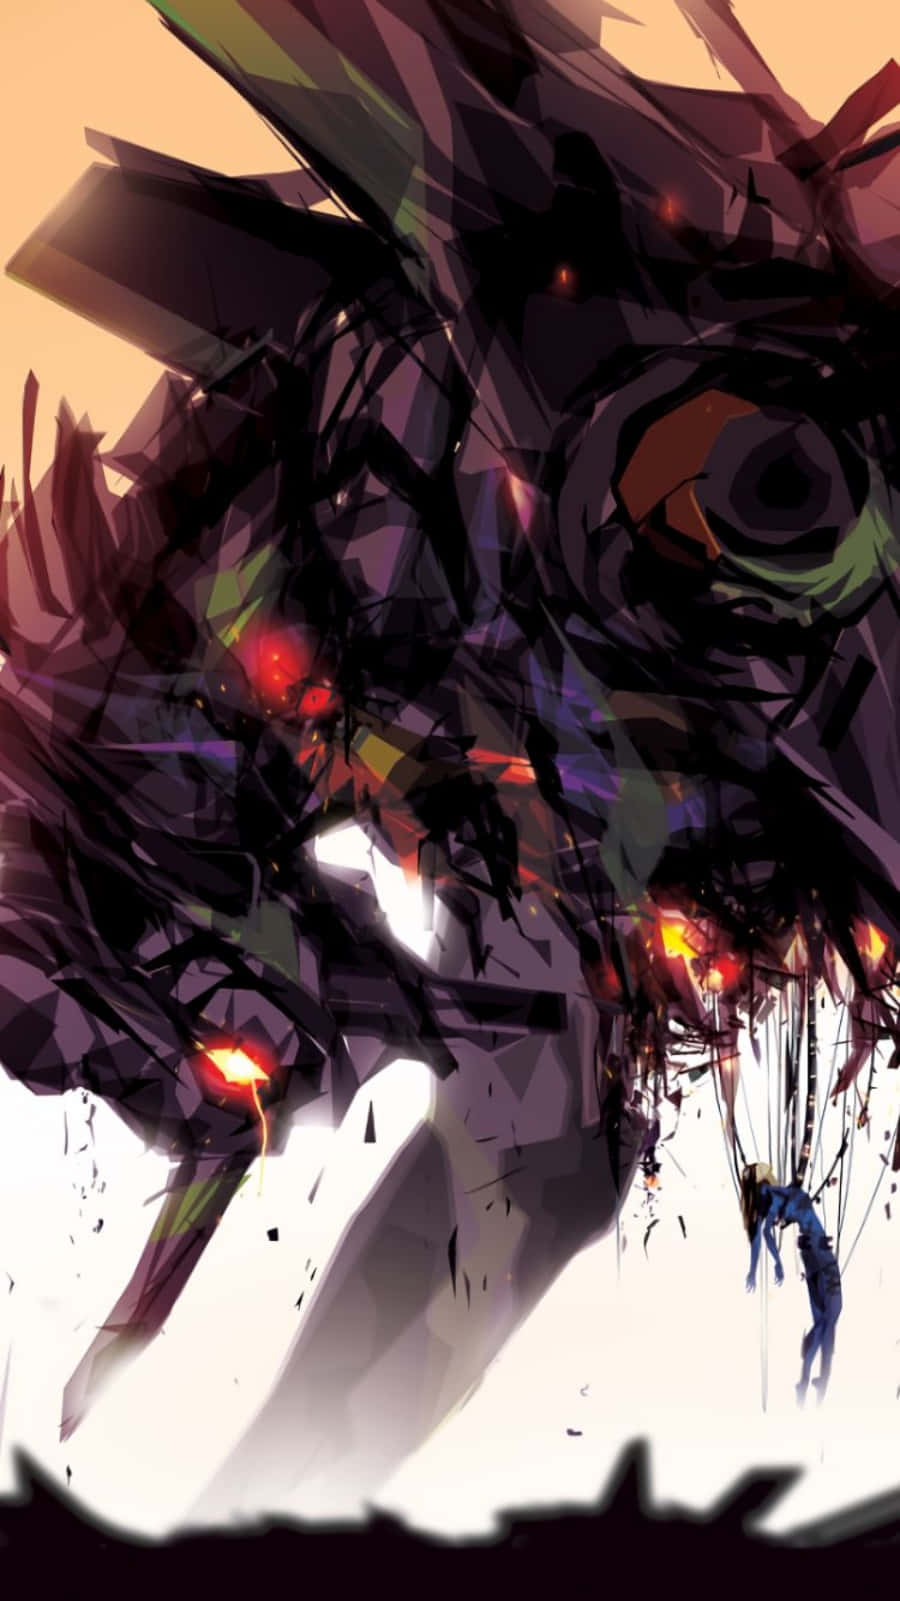 Be Excellent to Each Other Party On Dudes  More Evangelion Iphone 5  background that I have